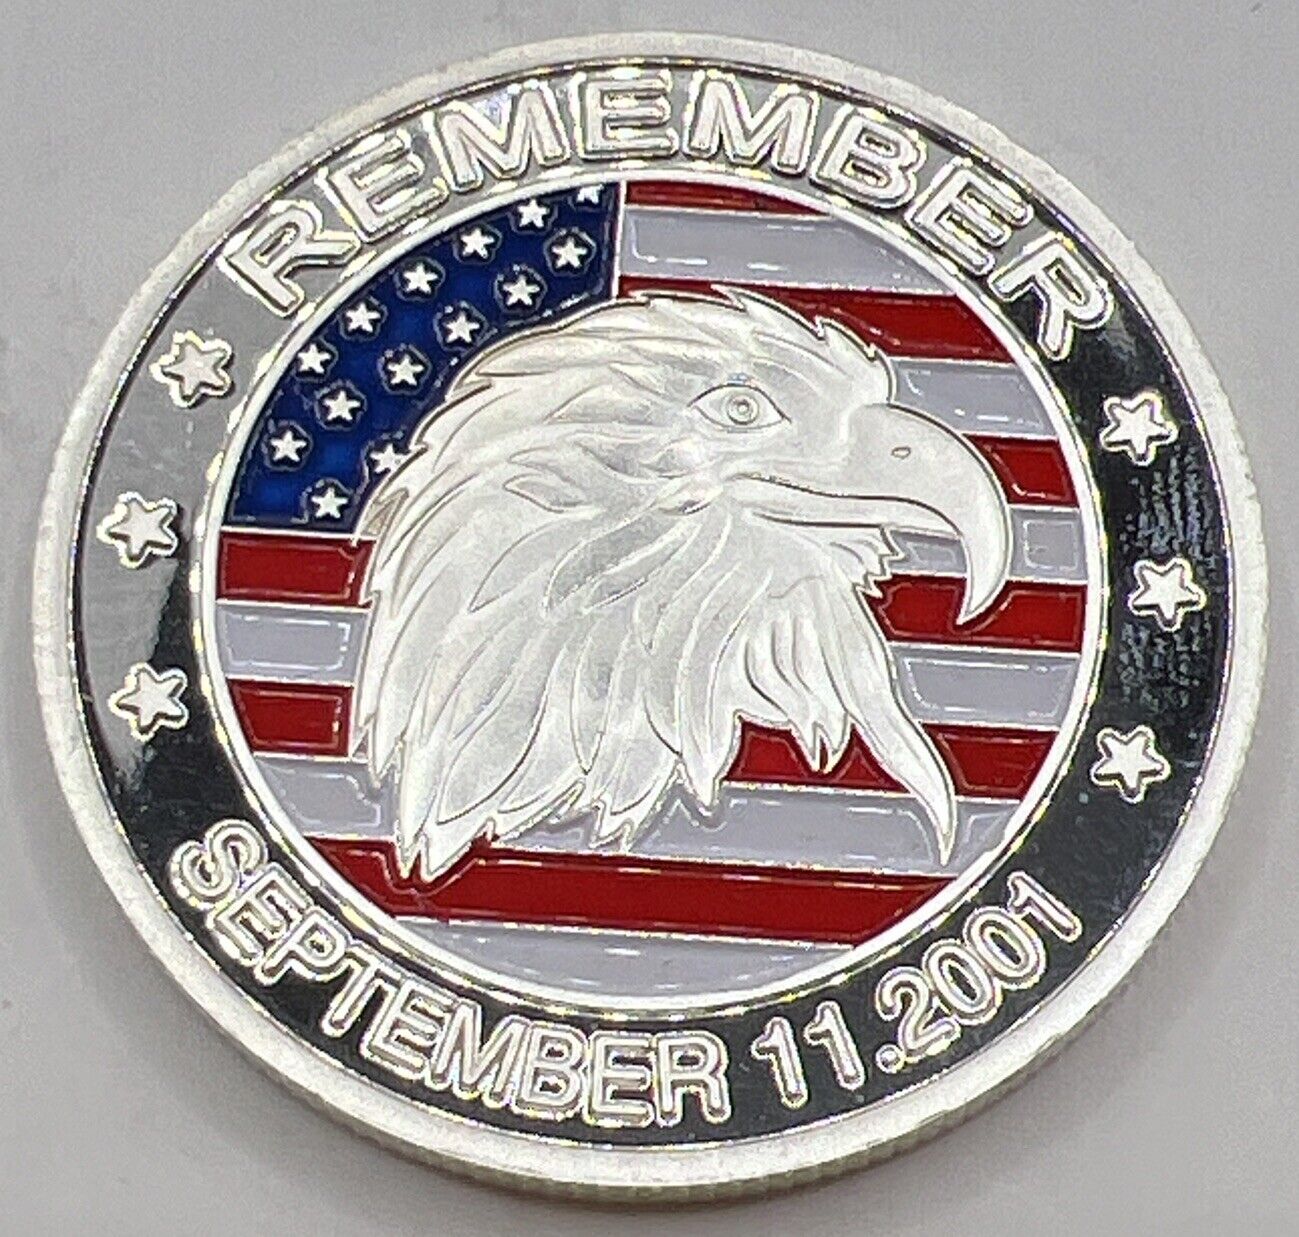 * September 11 2001 Challenge Coin 911 American Heroes Honor Service Sacrifice